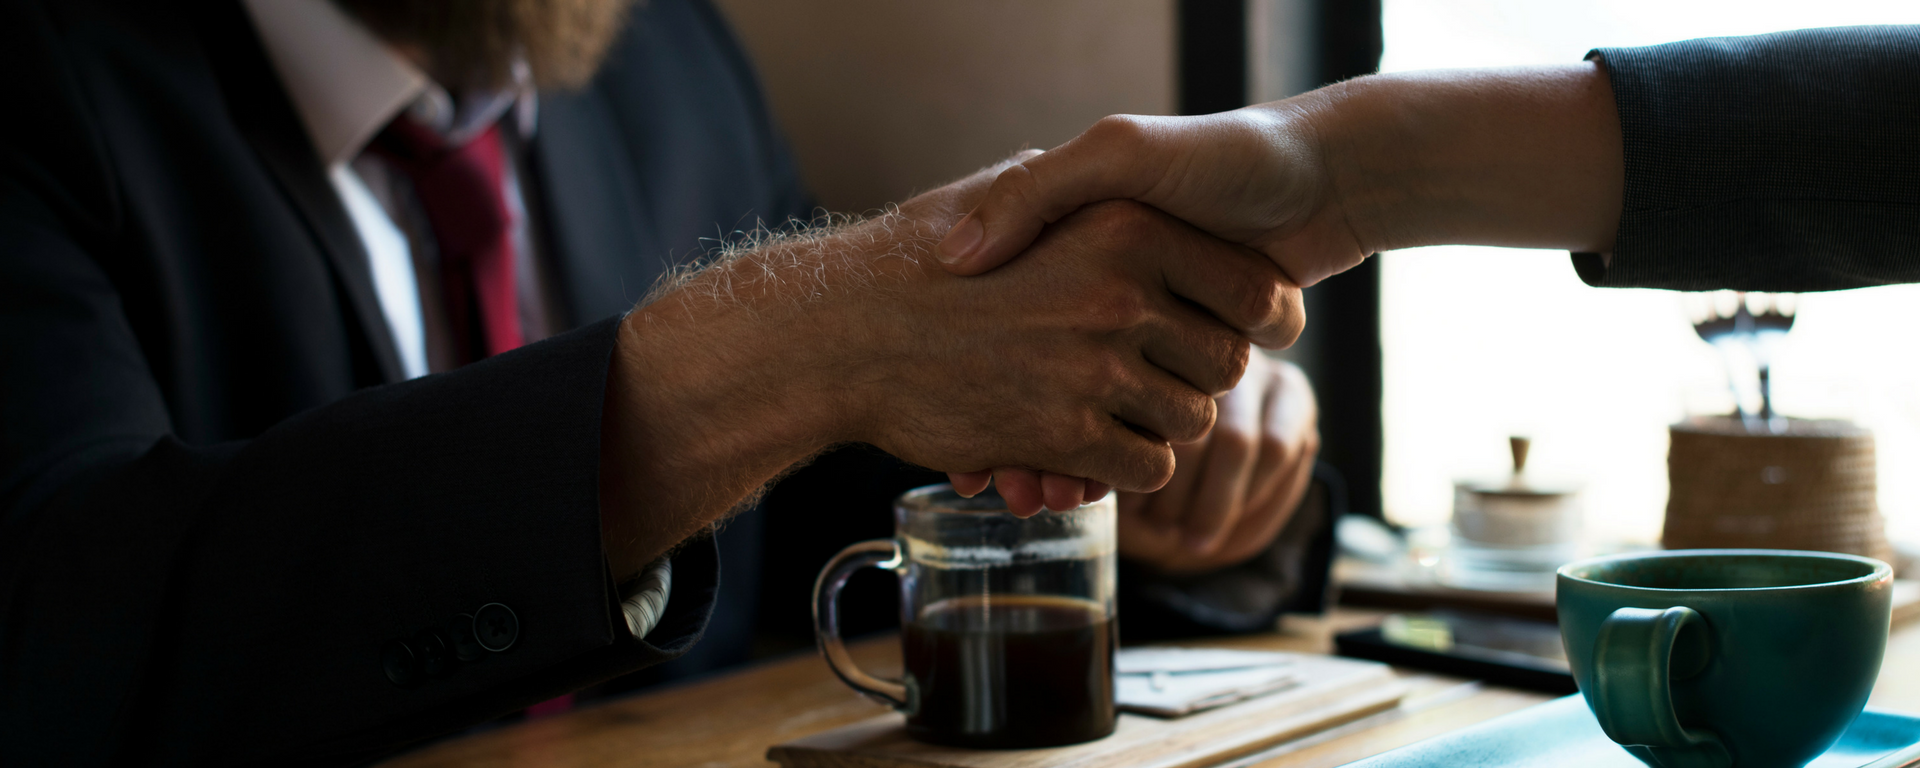 business-referral-hand-shake